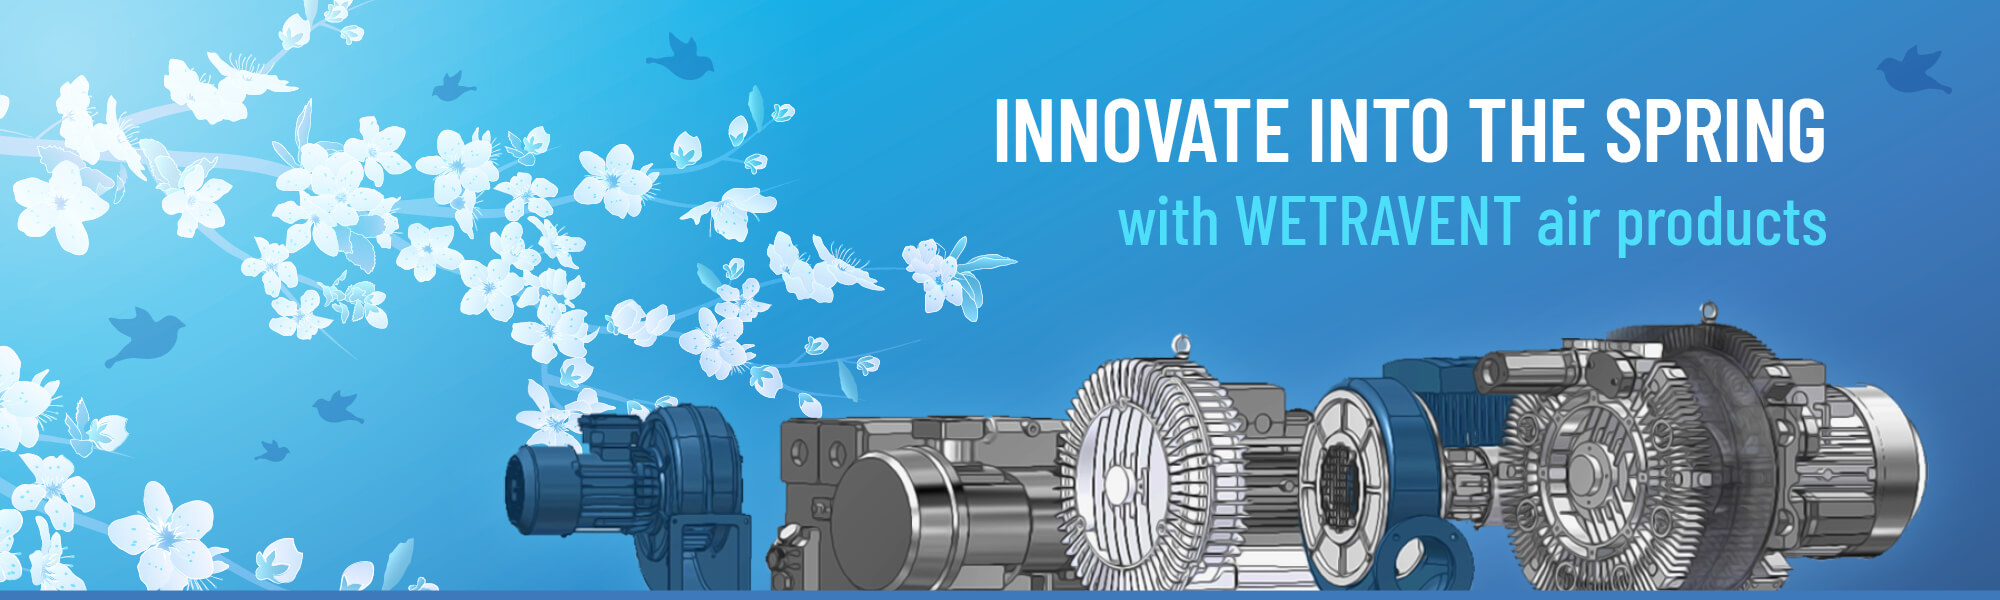 WETRAVENT Air Products - Innovate into the spring.